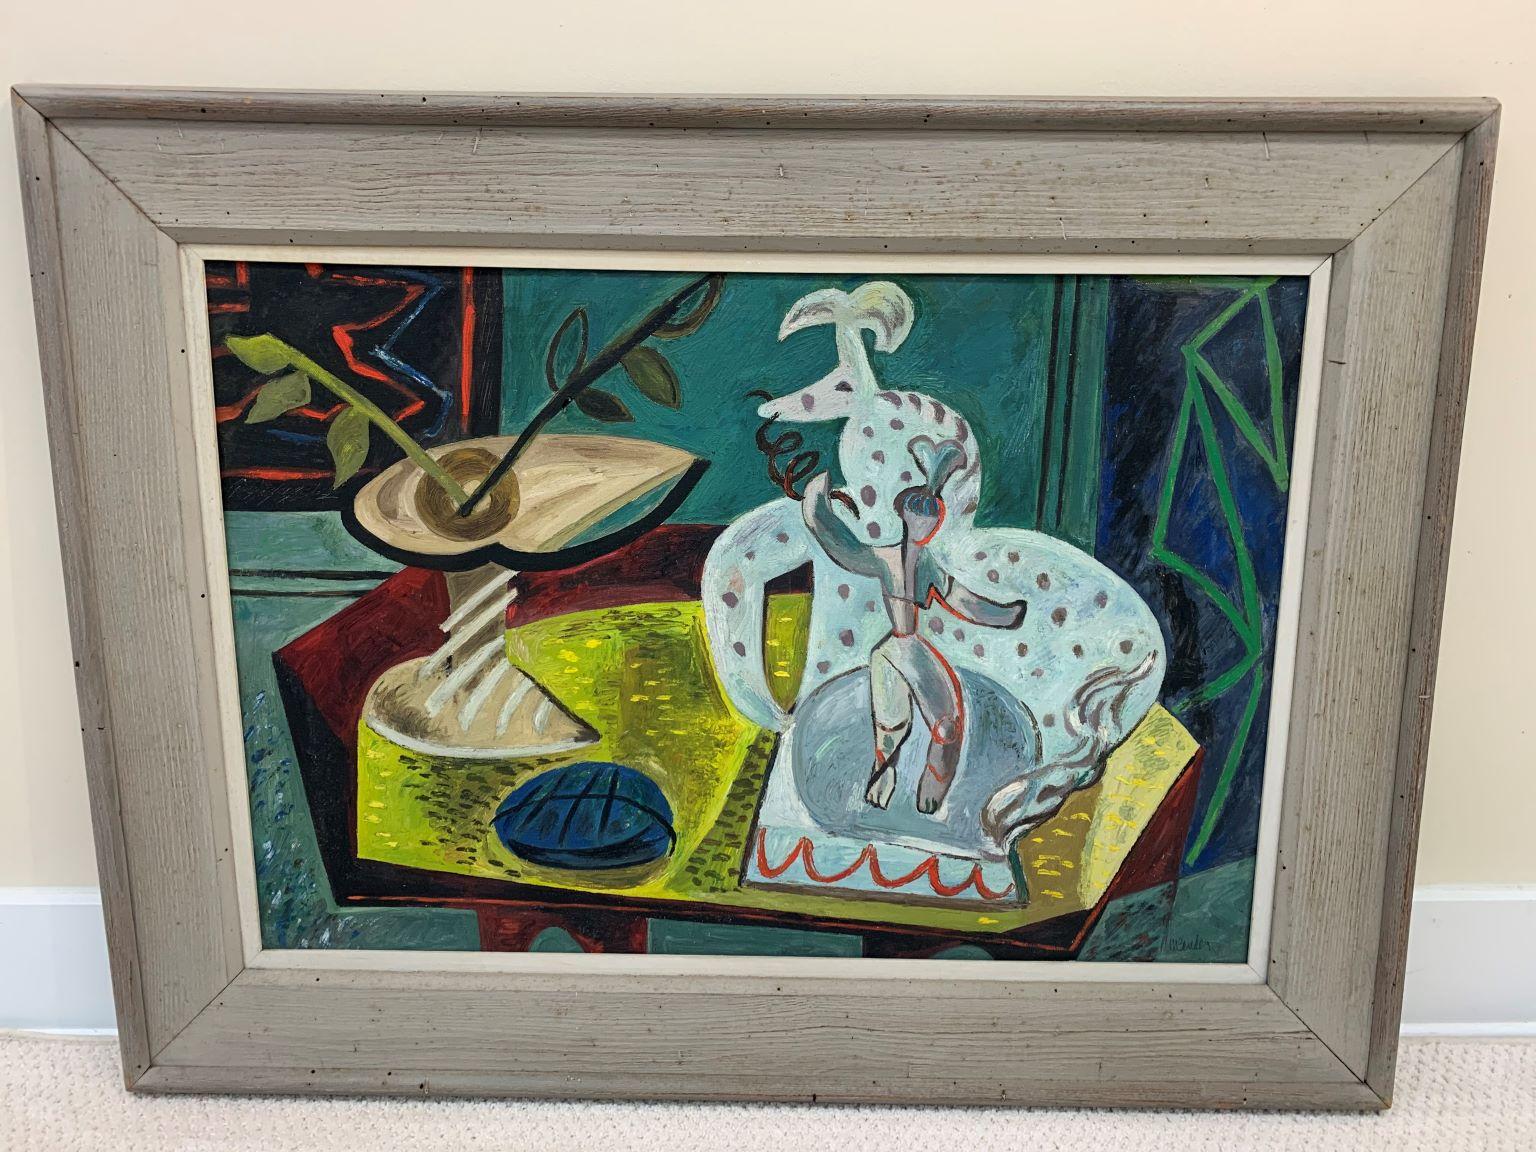 Early May Bender oil on canvas painting. Modernist abstract still life with dancing figure and vase. Signed on back and dated 1940 in original gray ceruse oak frame. Bender has had numerous solo exhibitions including Educational Testing Service,